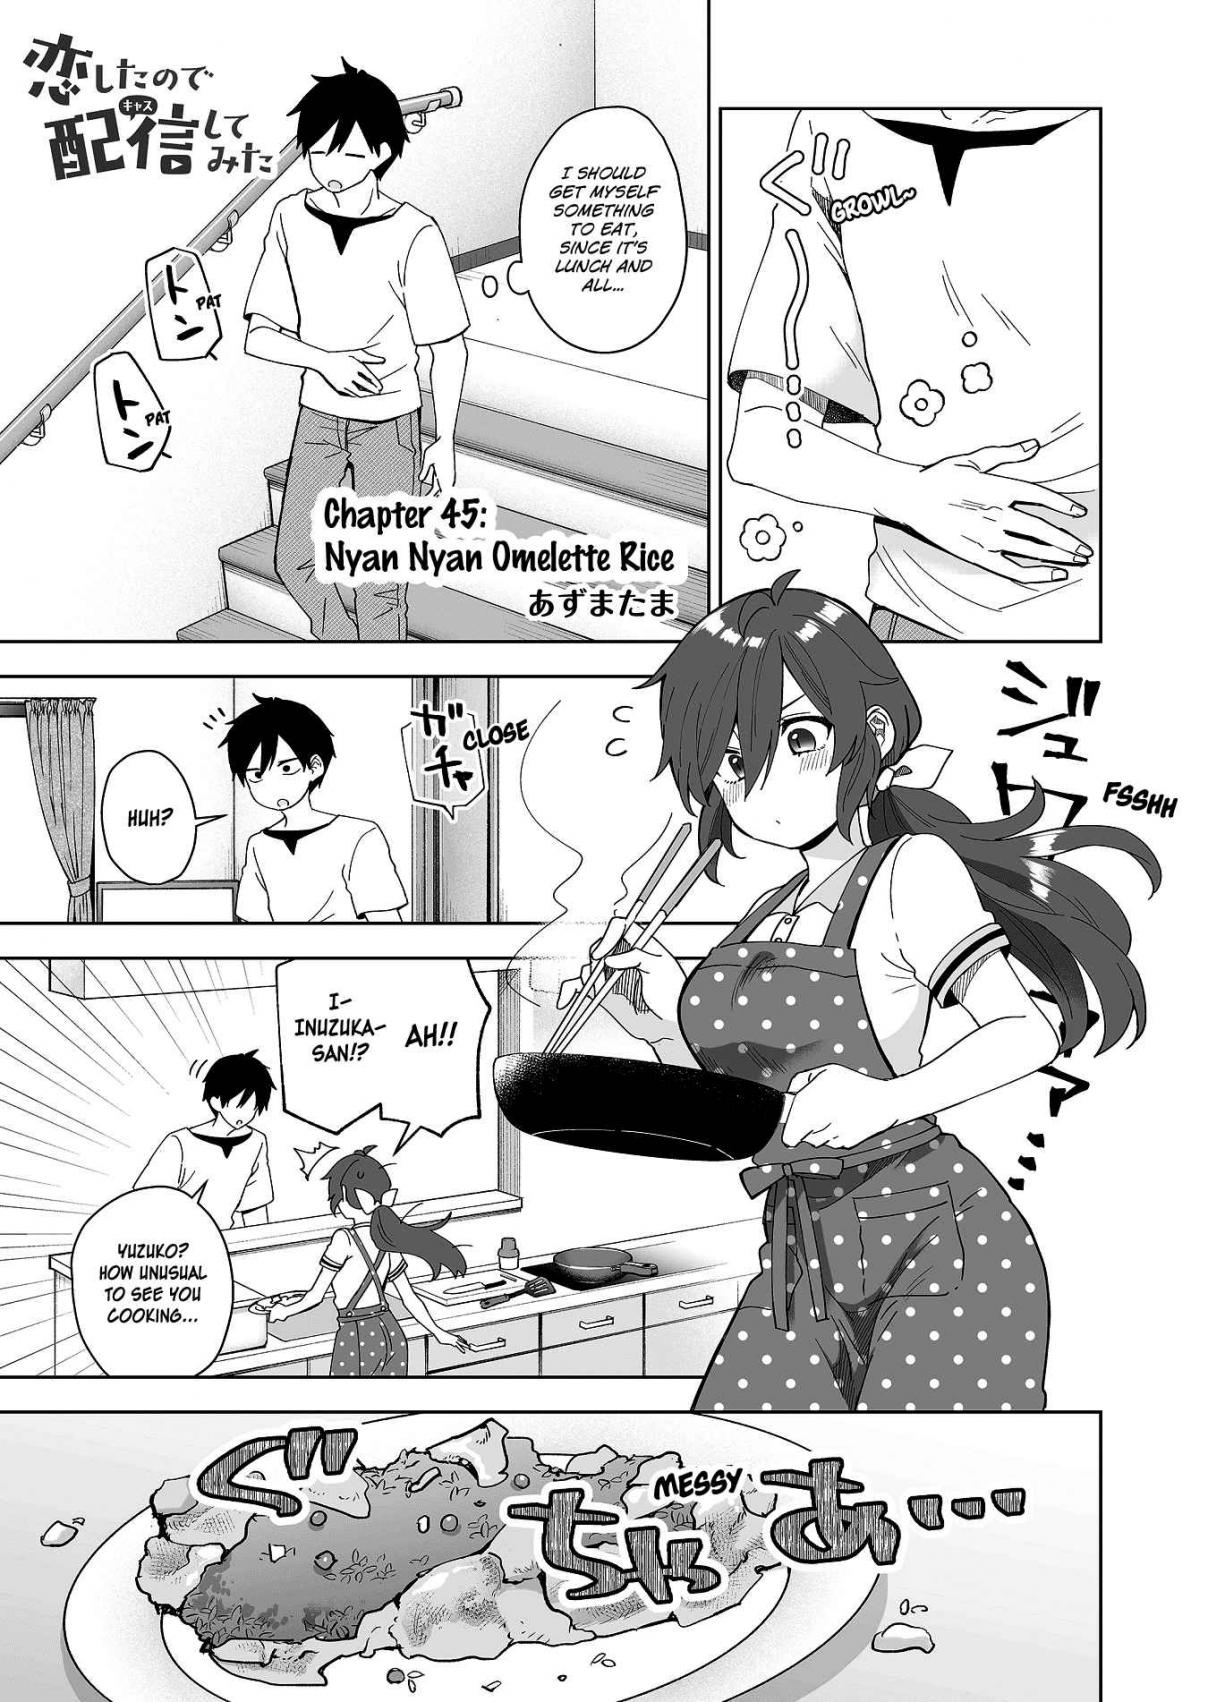 I Fell in Love, so I Tried Livestreaming. Ch. 45 Nyan Nyan Omelette Rice